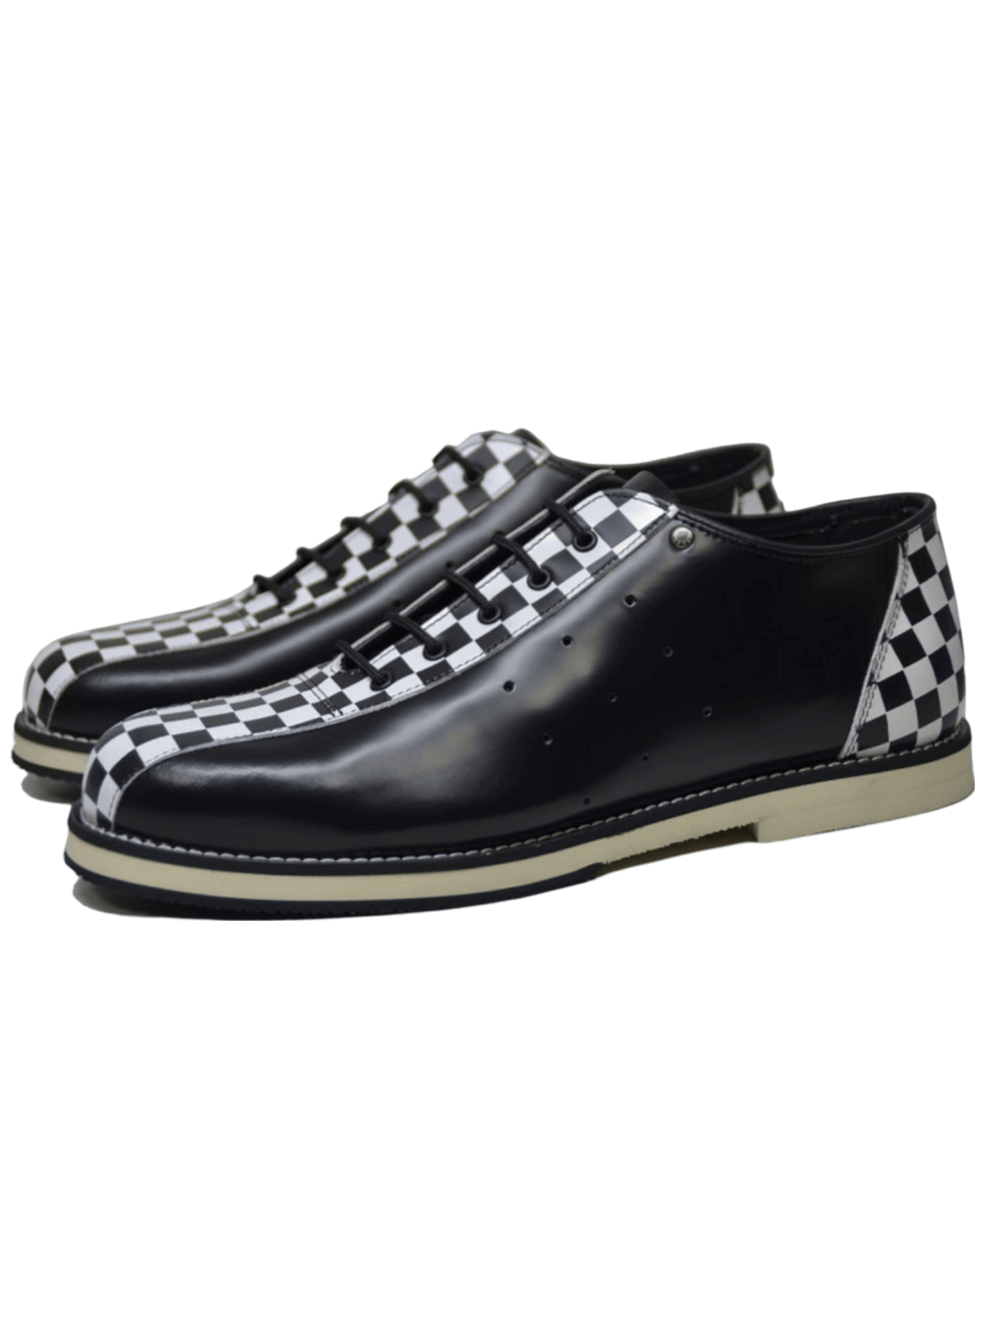 Unisex Lace-Up Bowling Shoes in Black and White